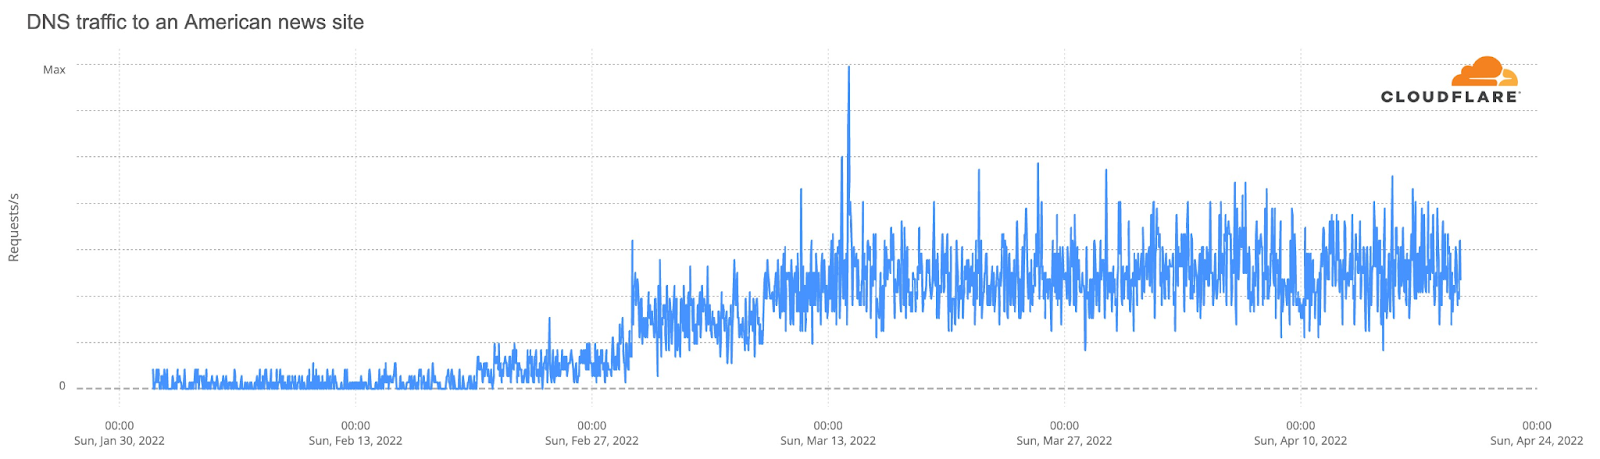 Chart depicting rising DNS traffic from Russia to an American news site from January through April 2022